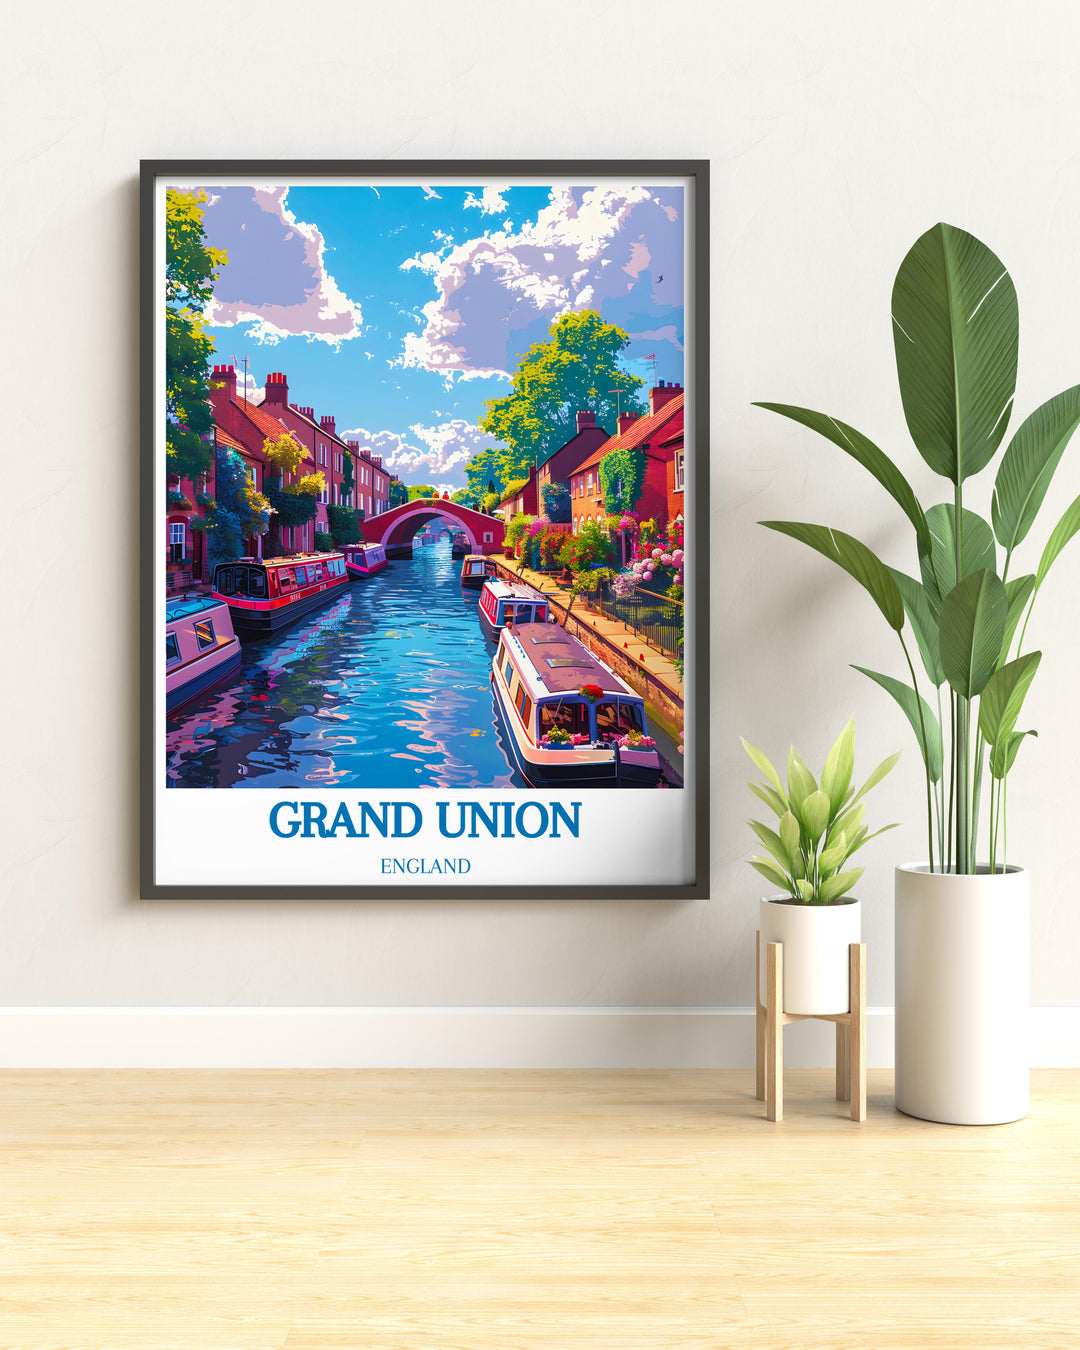 Artistic print capturing the charm of Little Venice, London with detailed narrowboats and reflections on the calm canal waters.